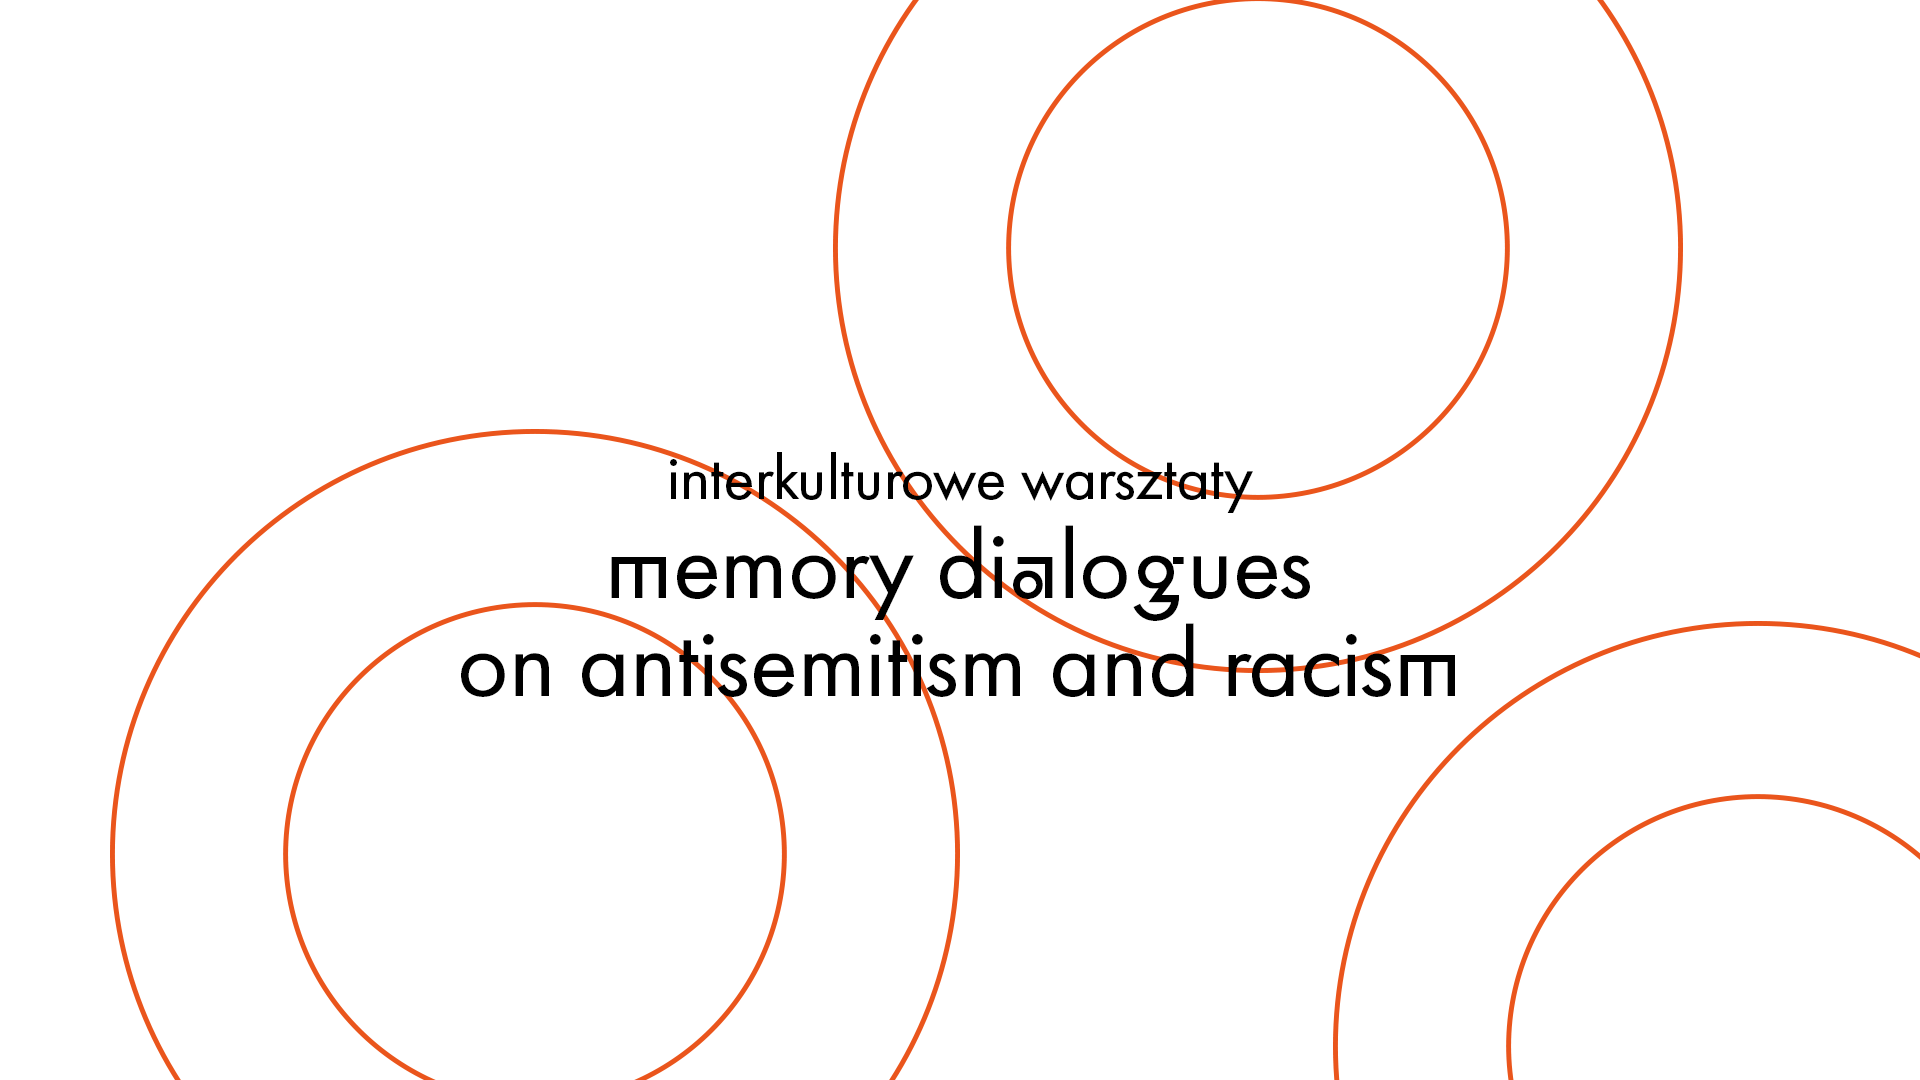 Memory dialogues on antisemitism and racism